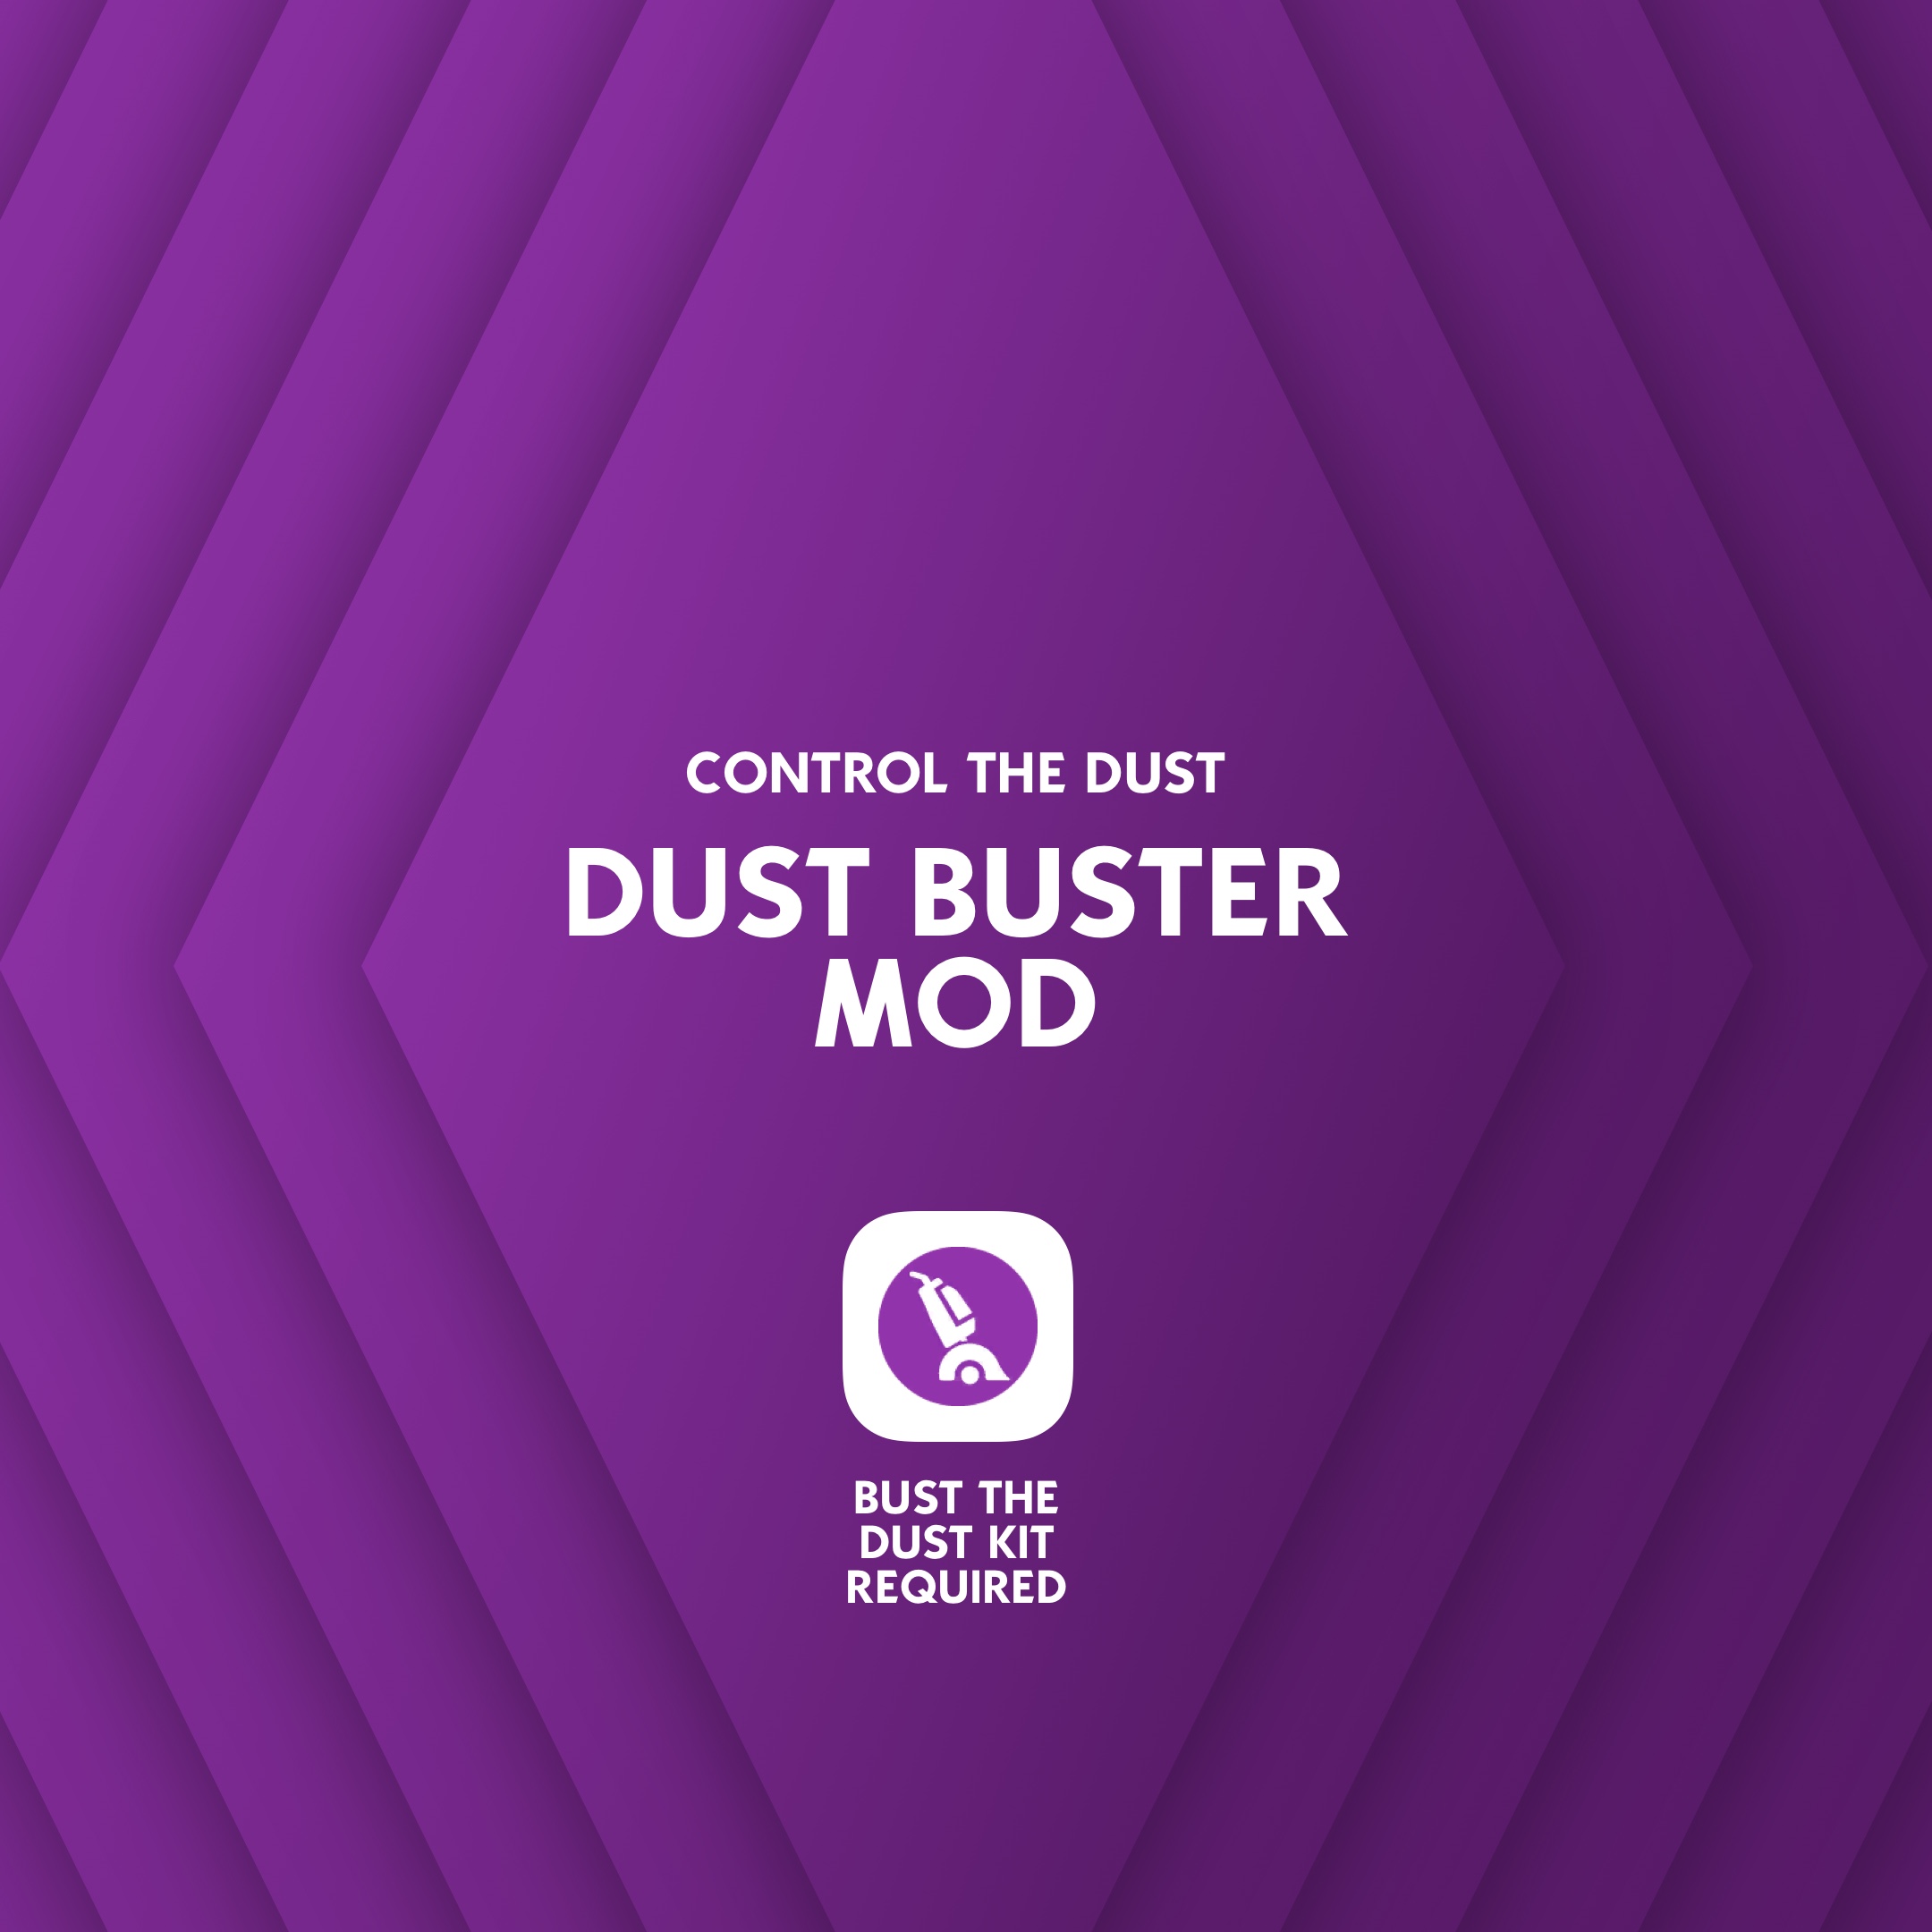 Sims 4 Updates: Mods / Traits: Dust Buster Mod: Control the Dust by lot51 -...